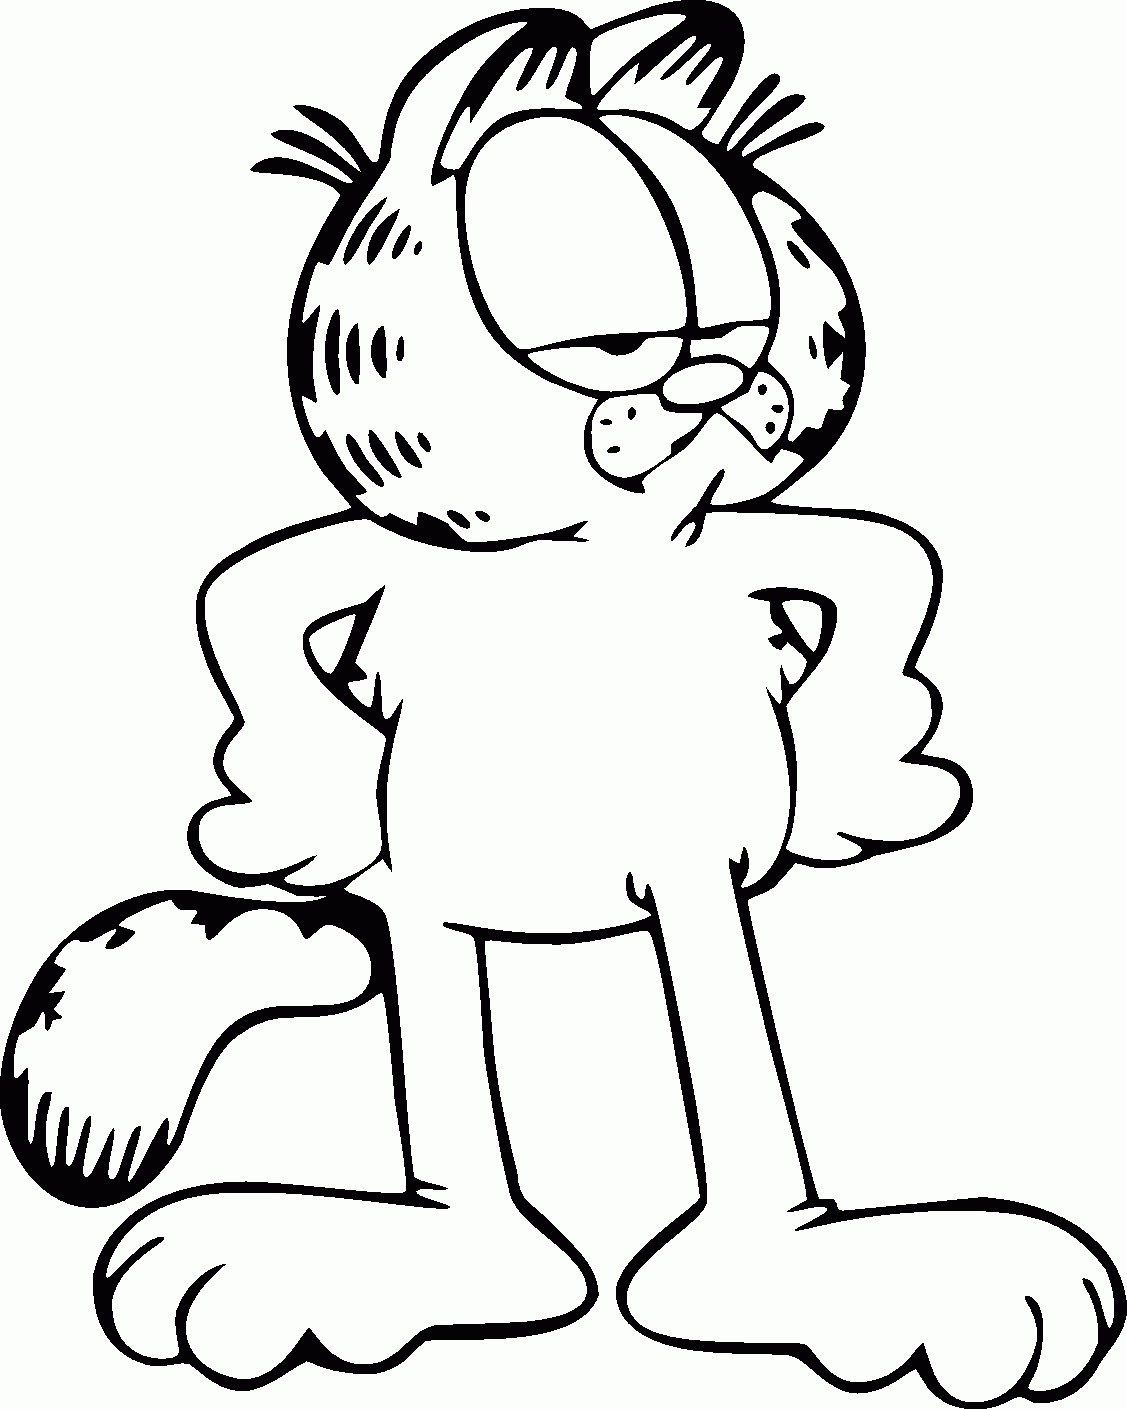 garfield coloring book pages - photo #49